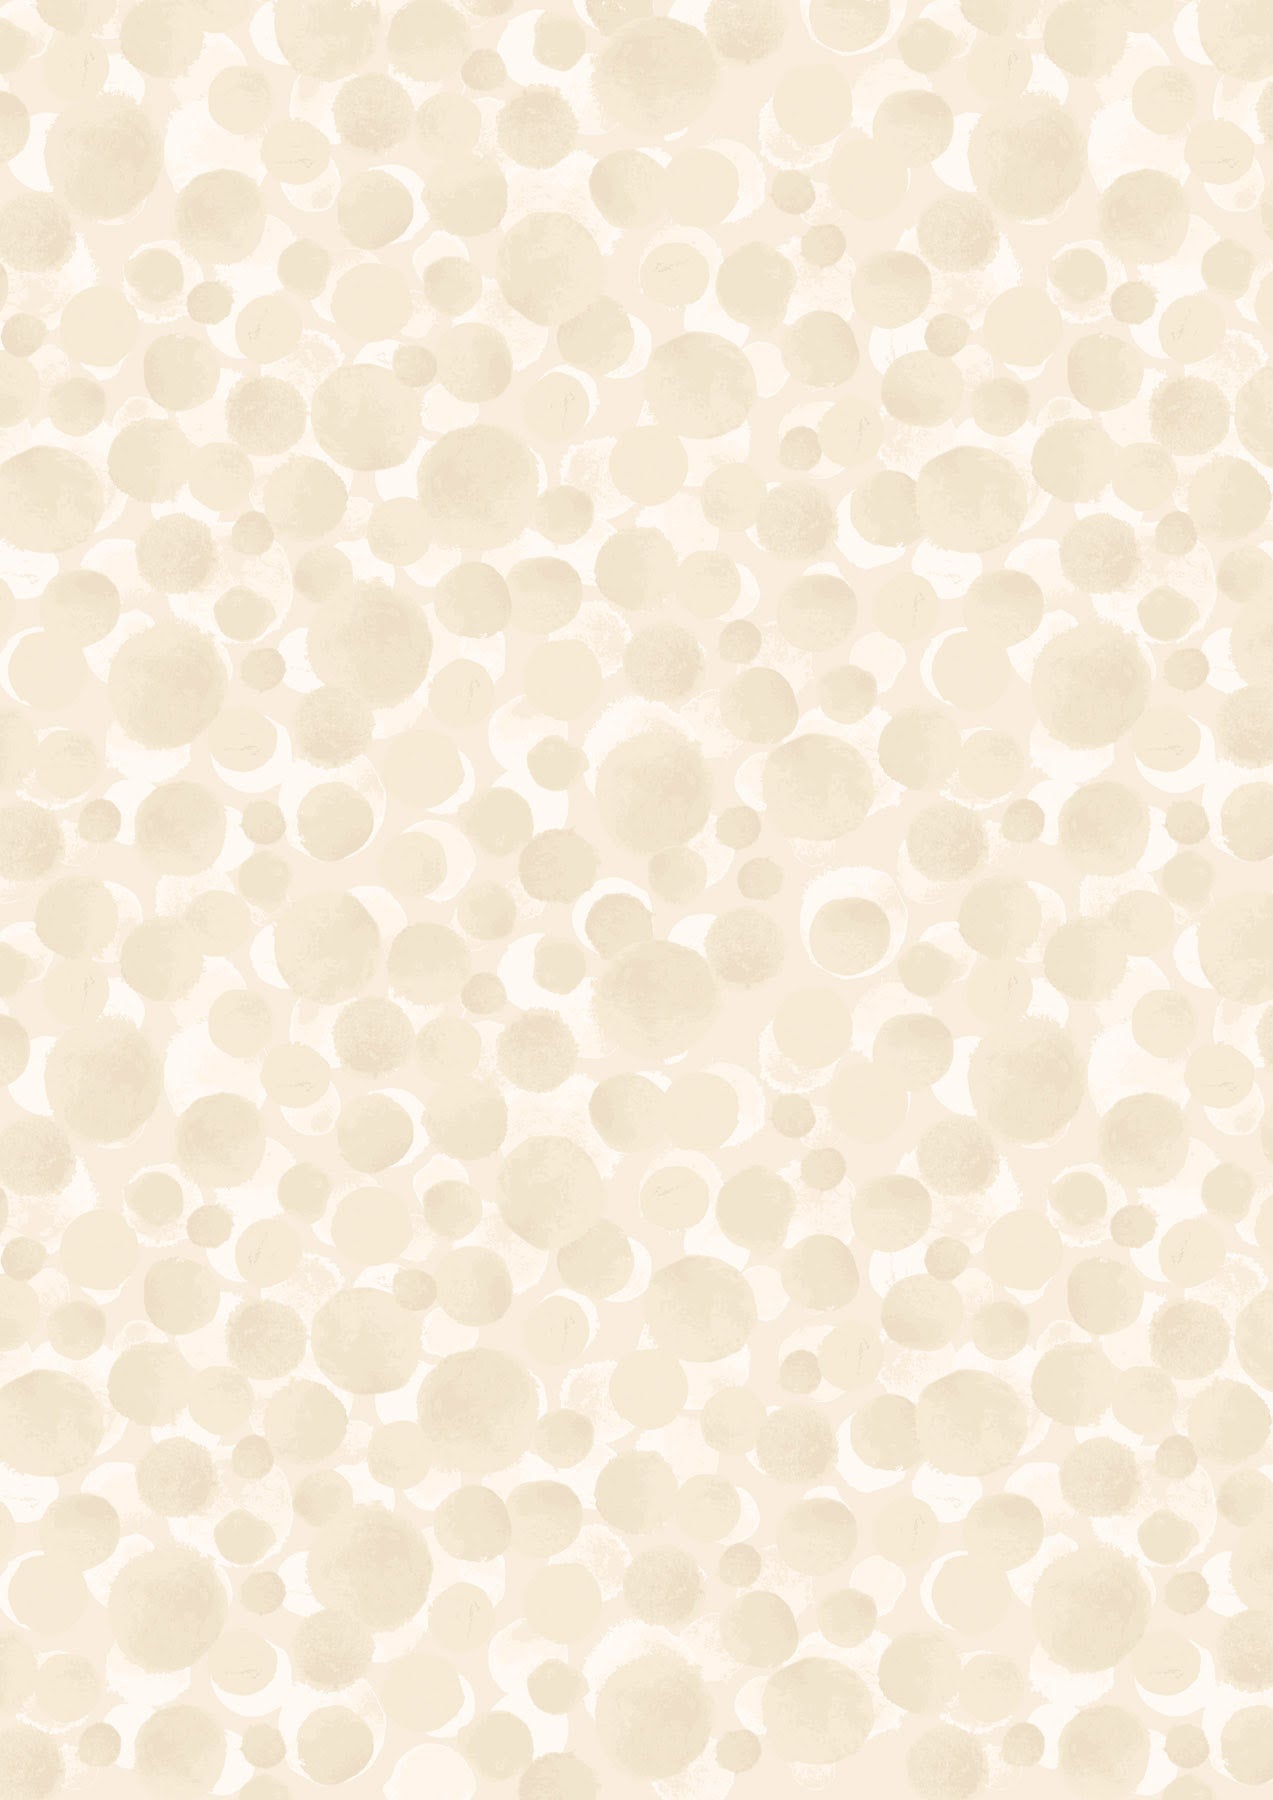 Bumbleberries - Cream / Unicorn Pearlescent (BB148) by Lewis & Irene - Cotton Blender